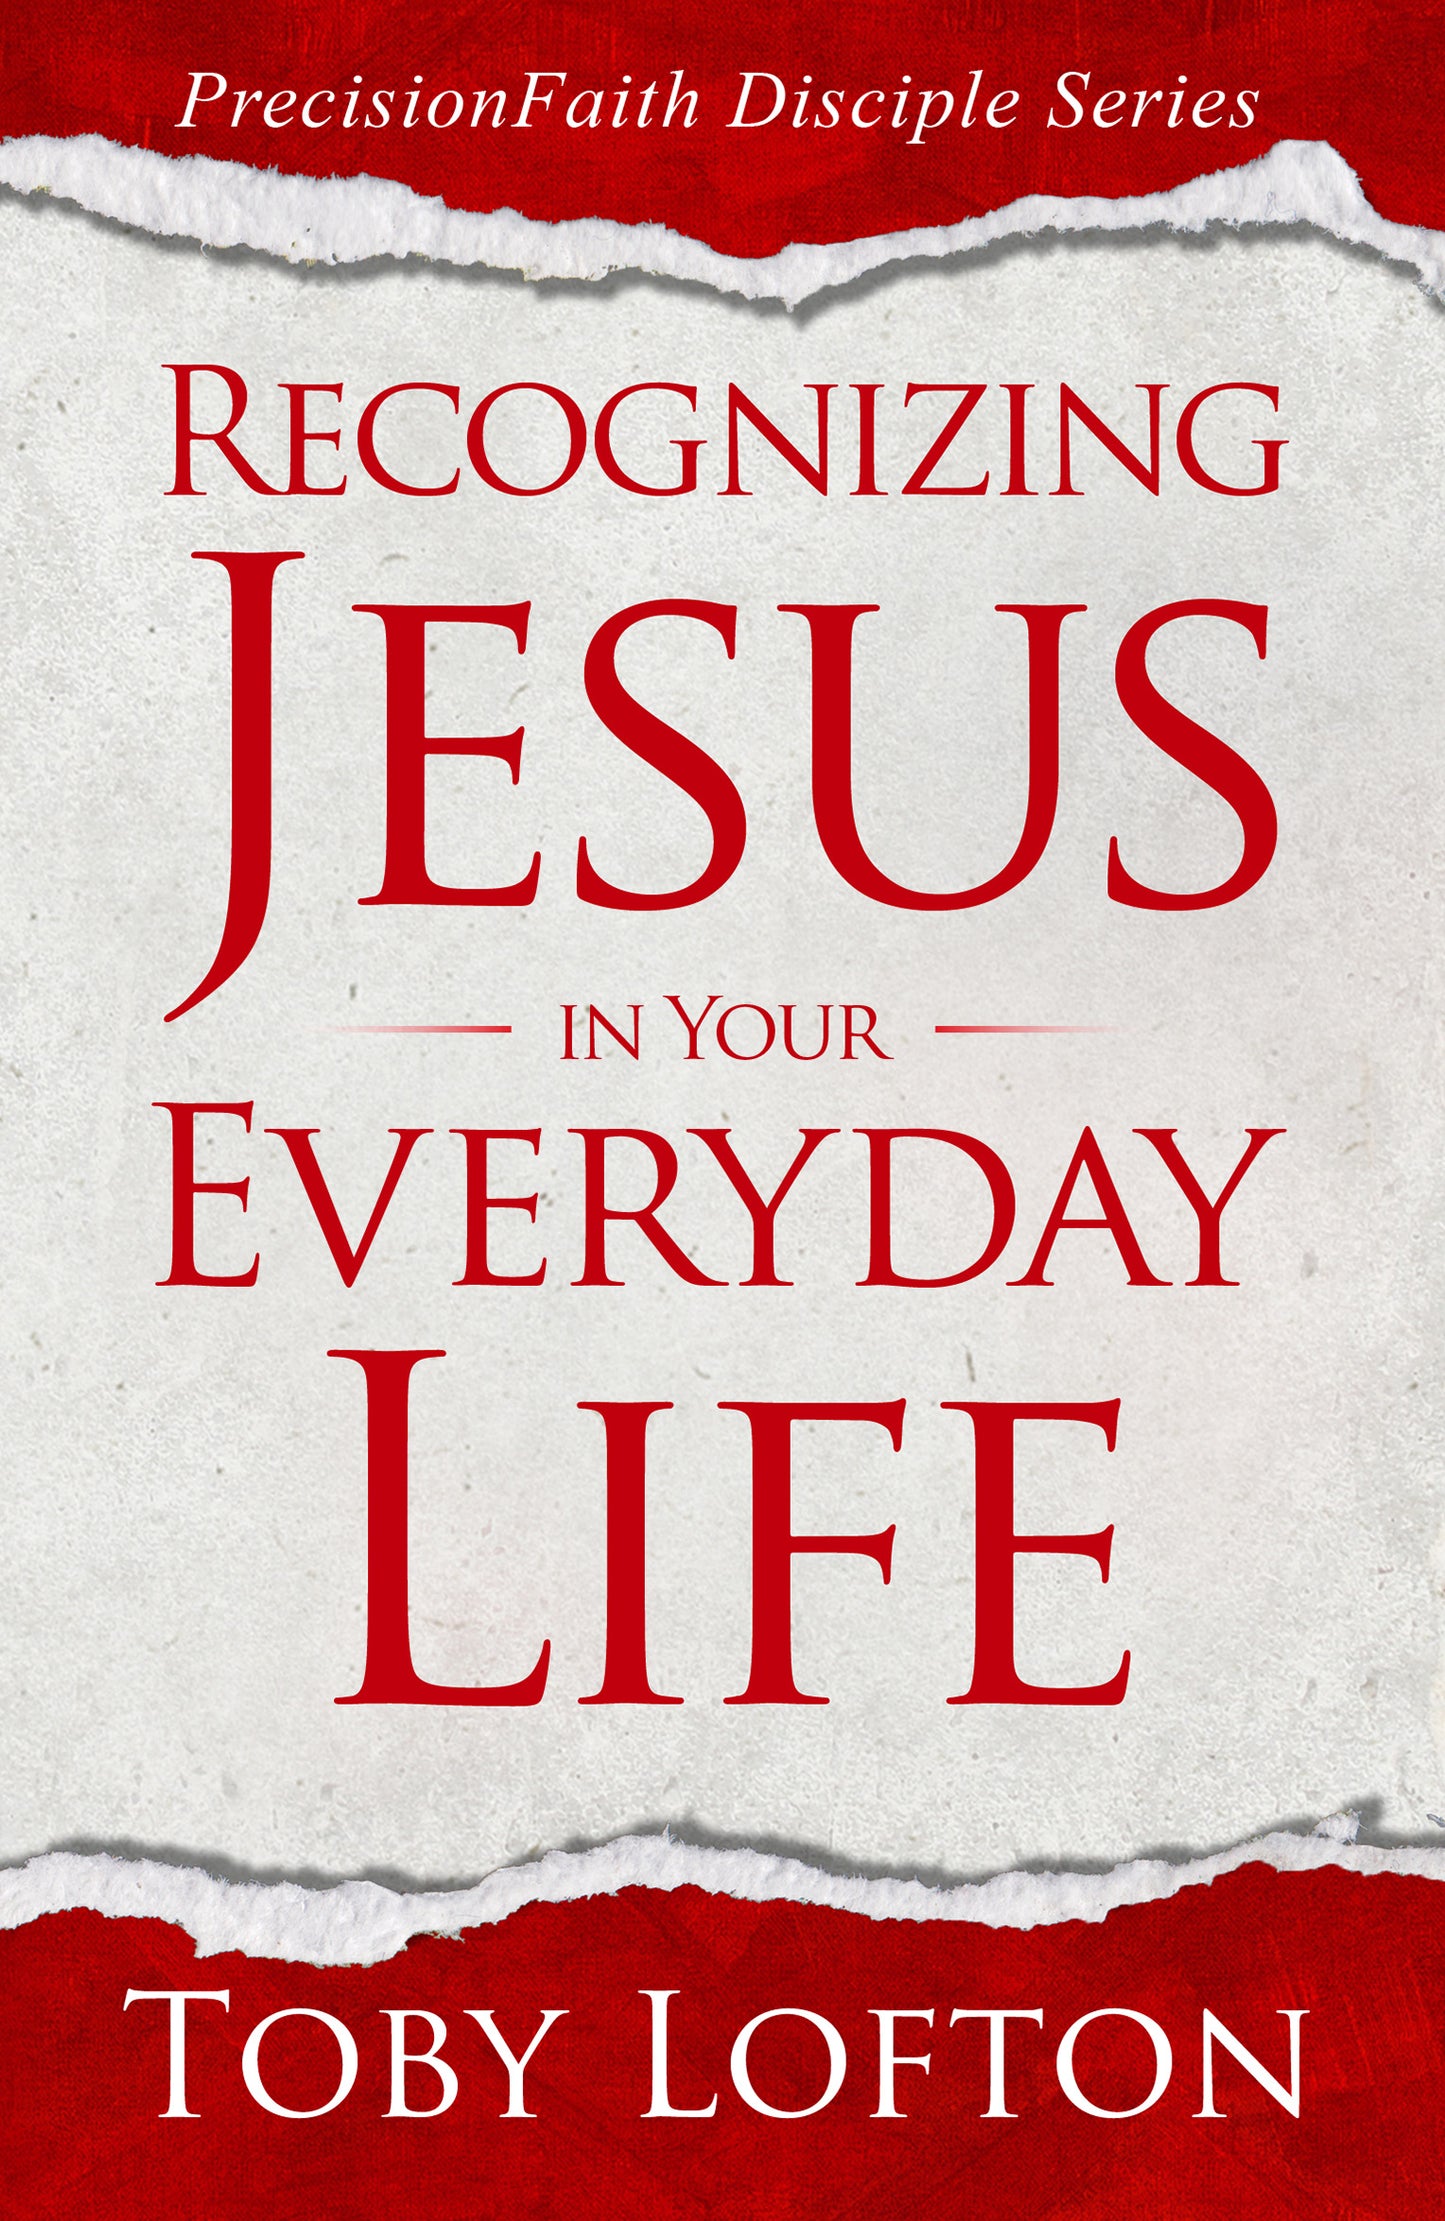 Recognizing Jesus in Your Everyday Life (eBook)